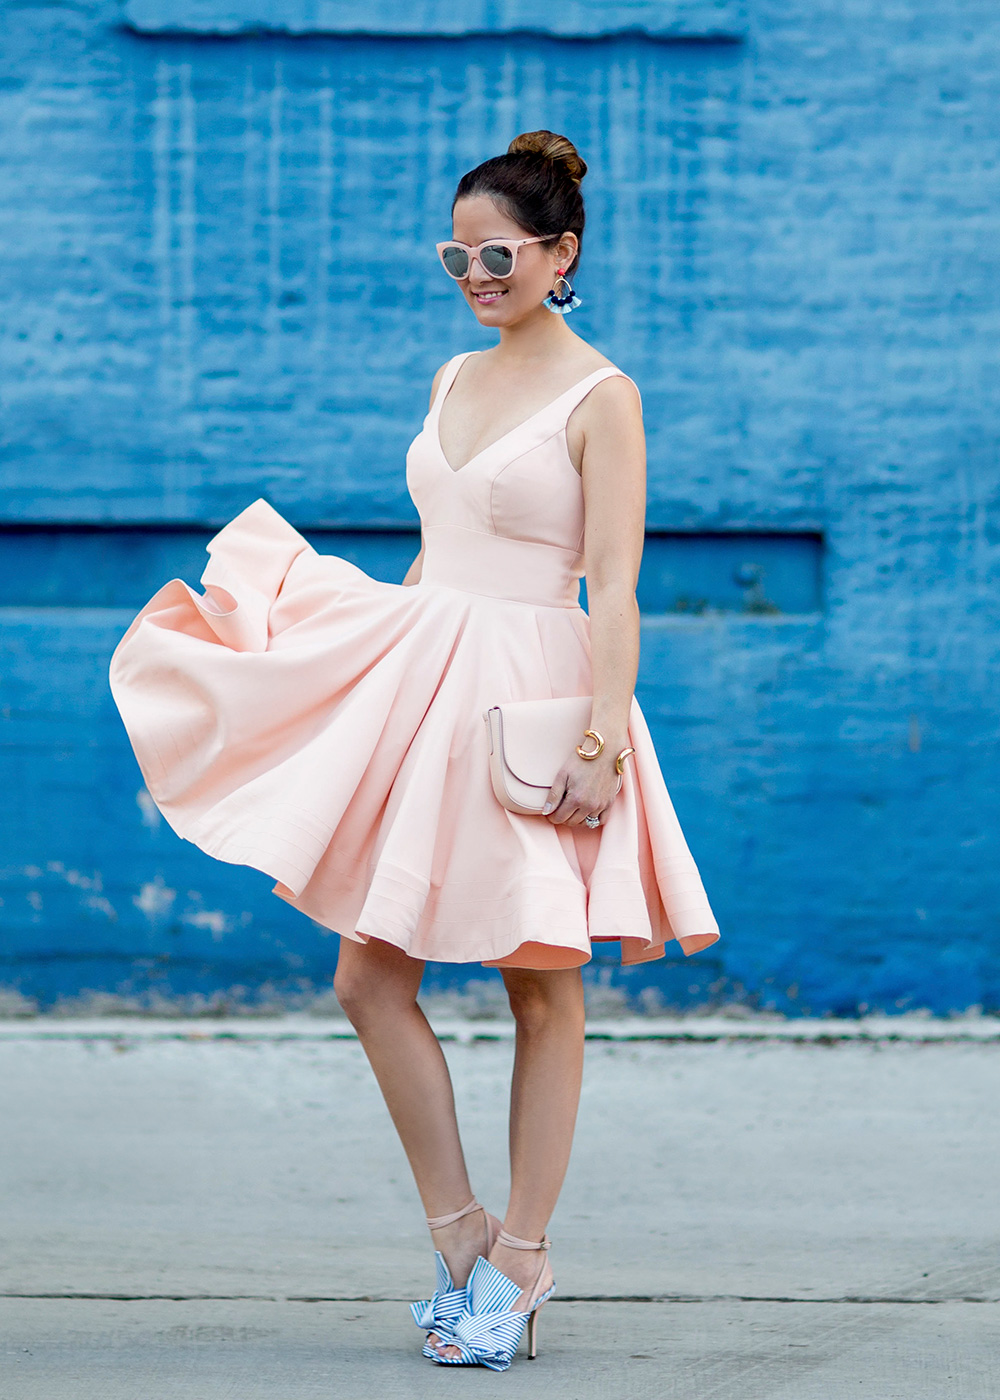 A Pink Fit and Flare Midi Dress at an Amazing Tile Mural - Style Charade